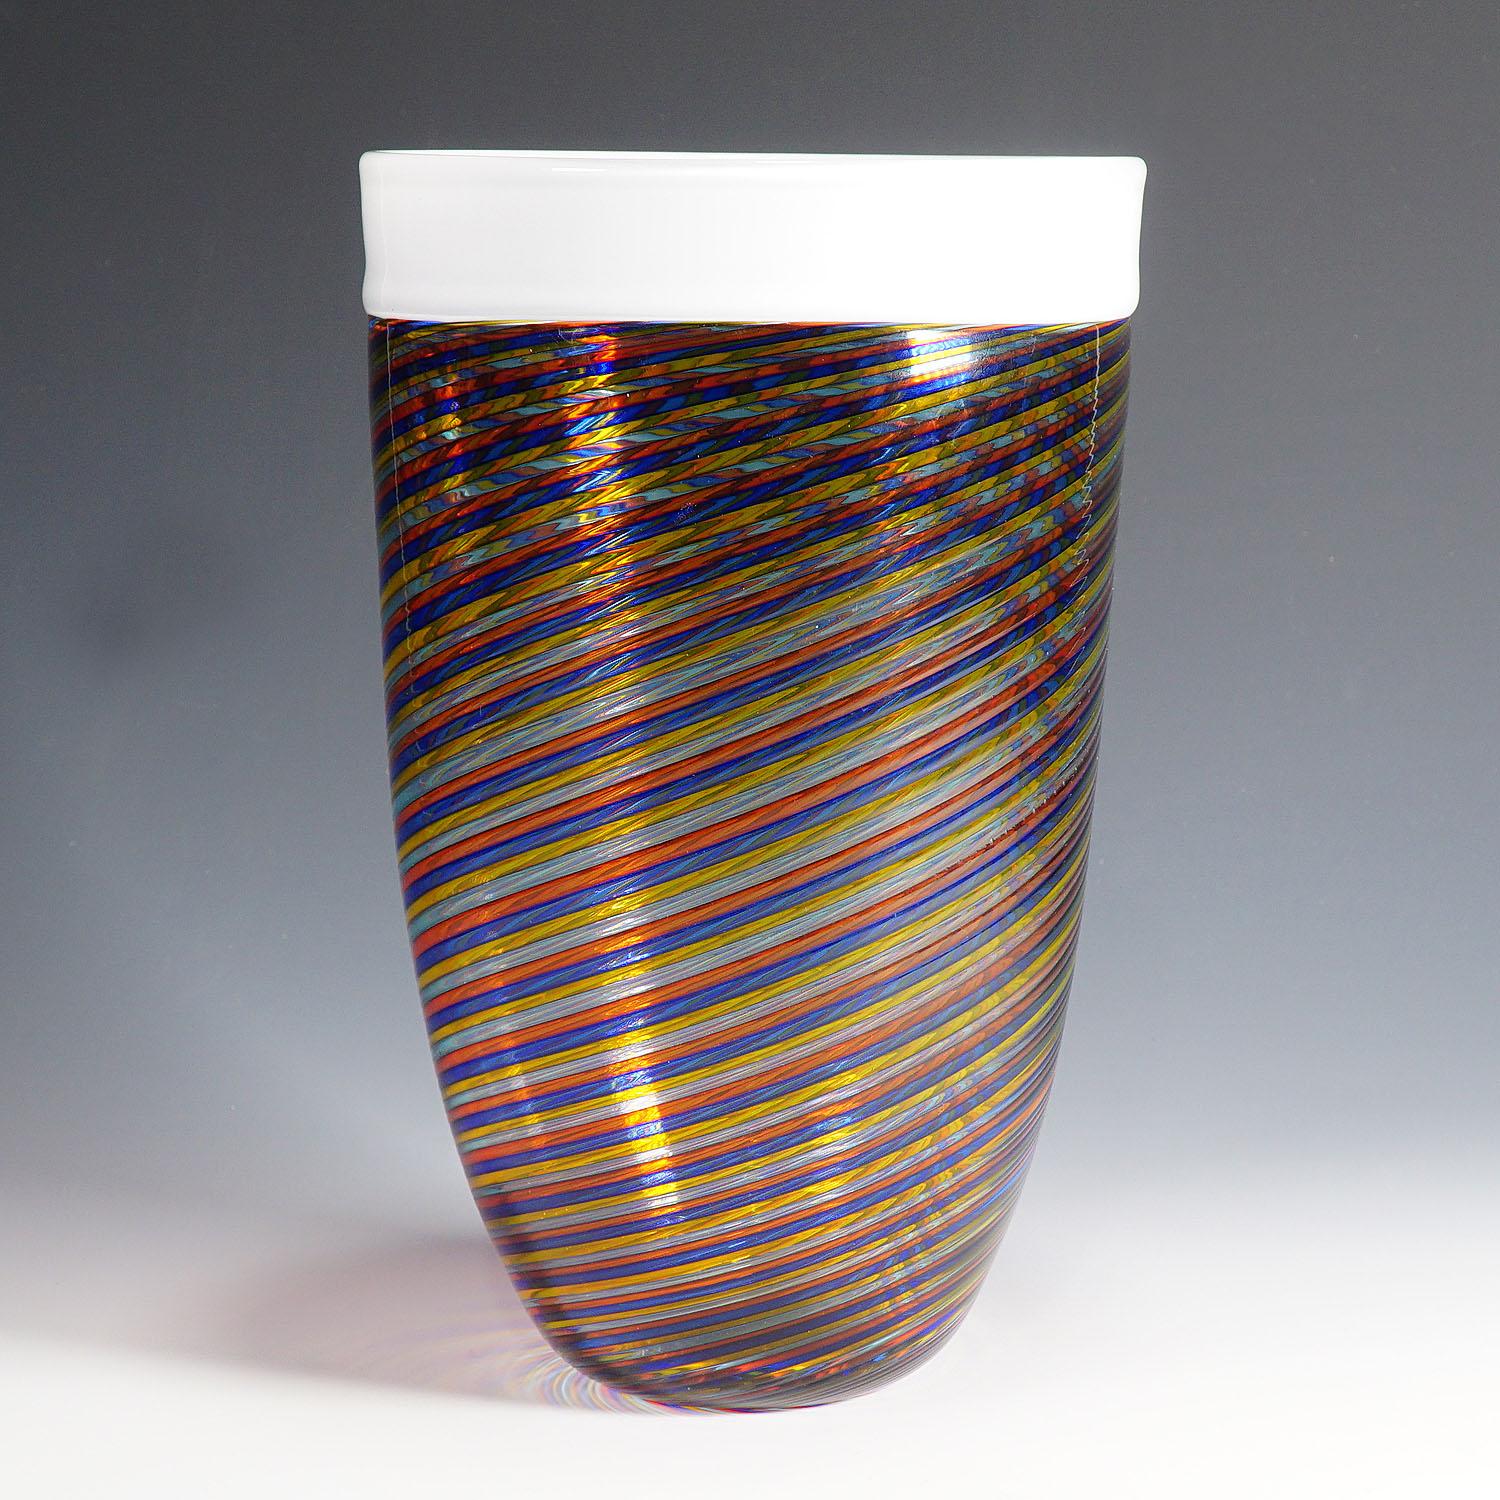 A rare filigrana glass vase manufactured by Vetreria Gino Cenedese ca. 1960. Multicolored filigrana glass bands in red, blue, yellow and light blue and a white rim attached in incalmo technique. A rare and decorative midcentury modern glass